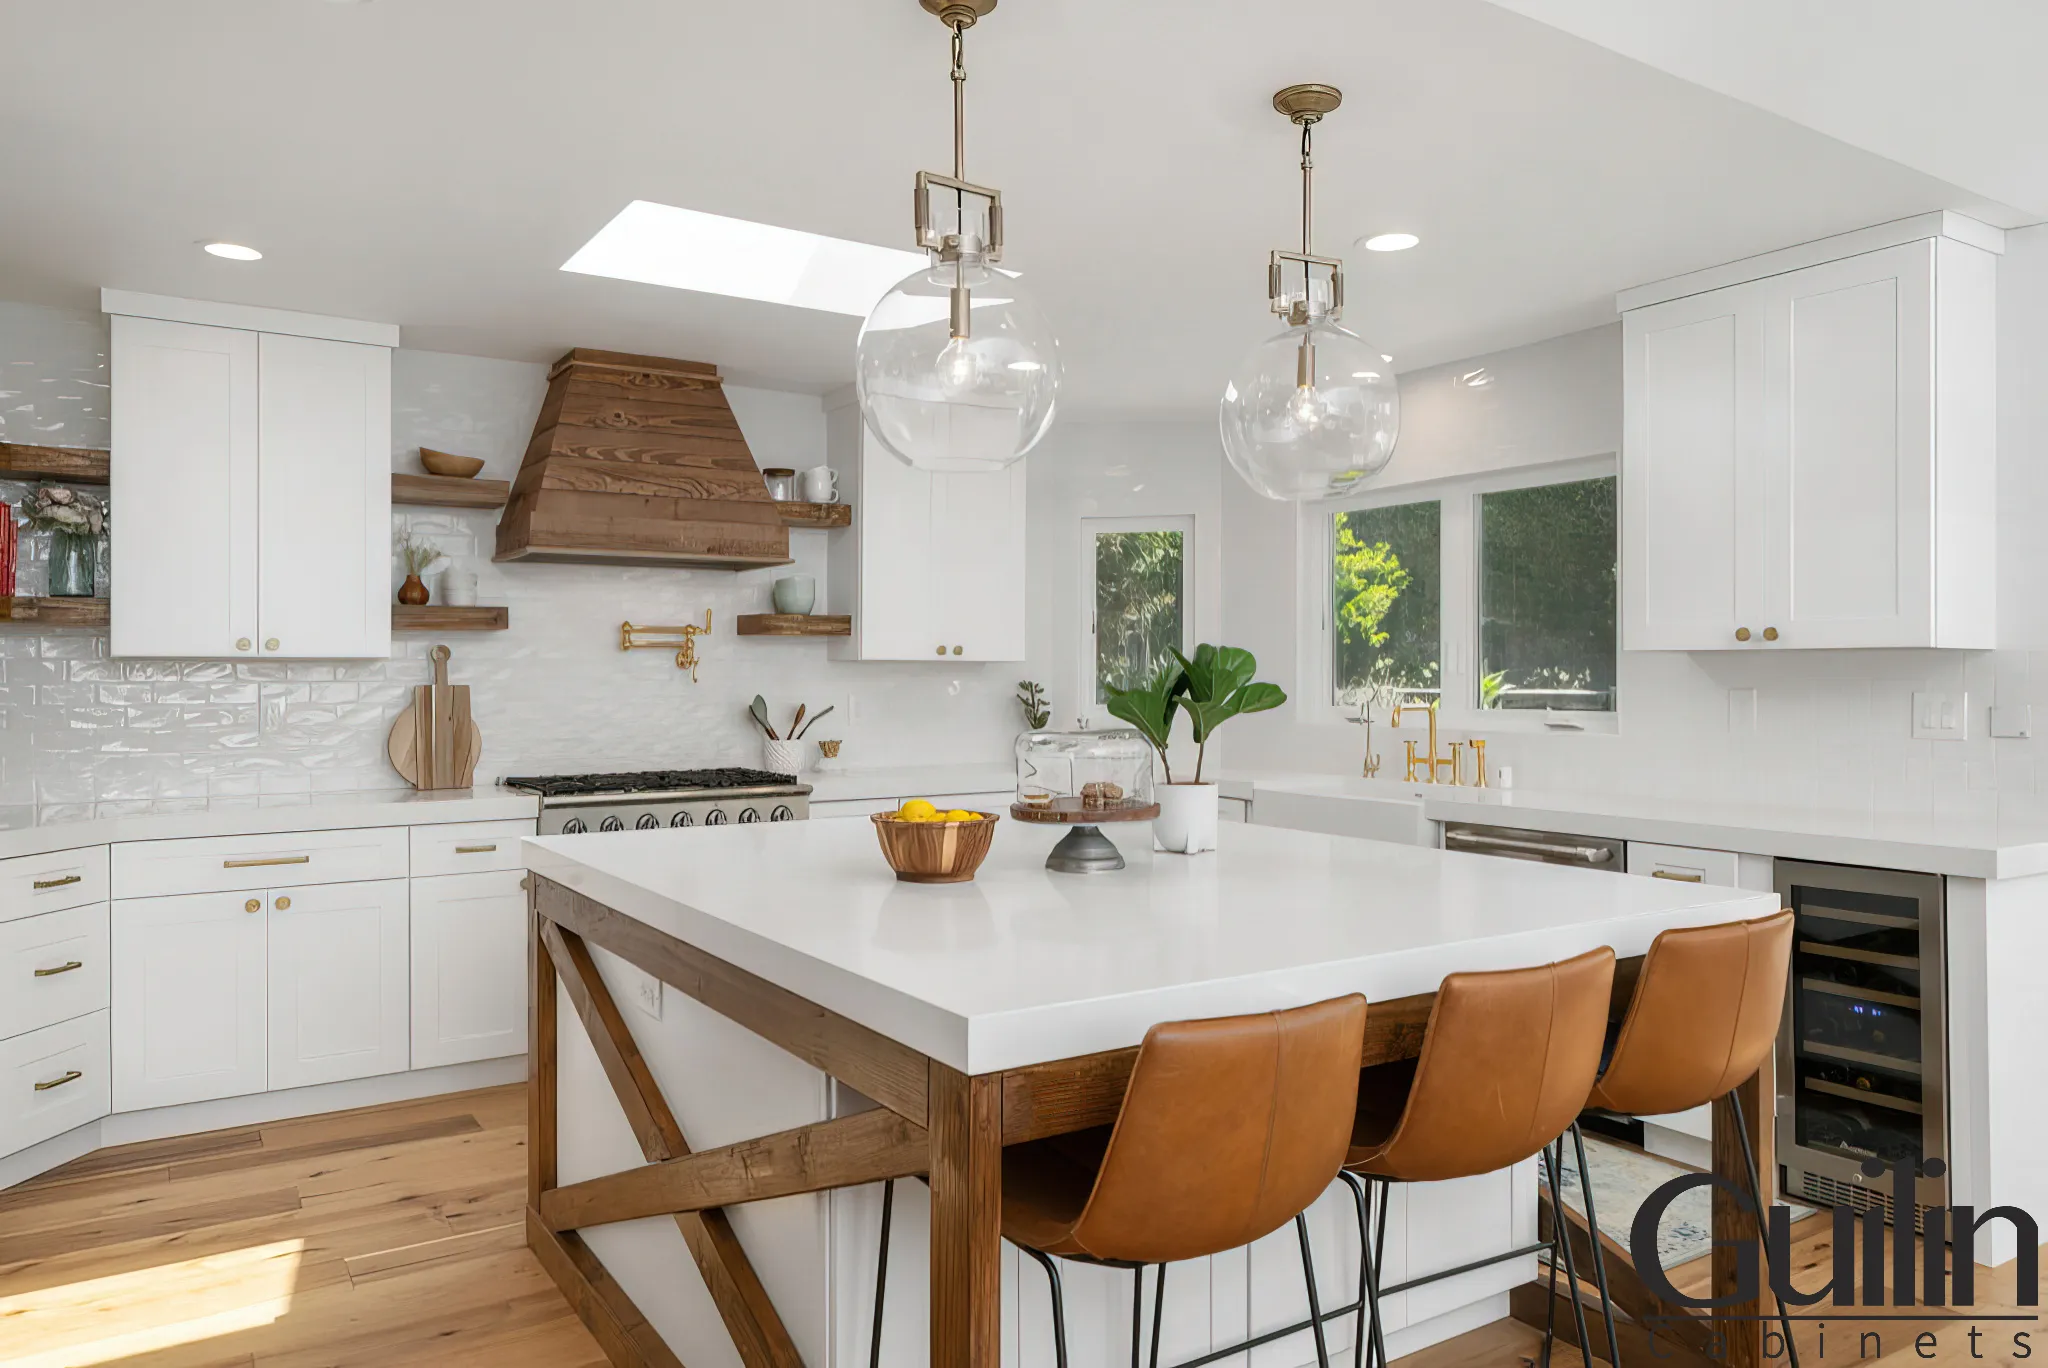 Kitchen farmhouse style is perfect fit with white cabinets creats